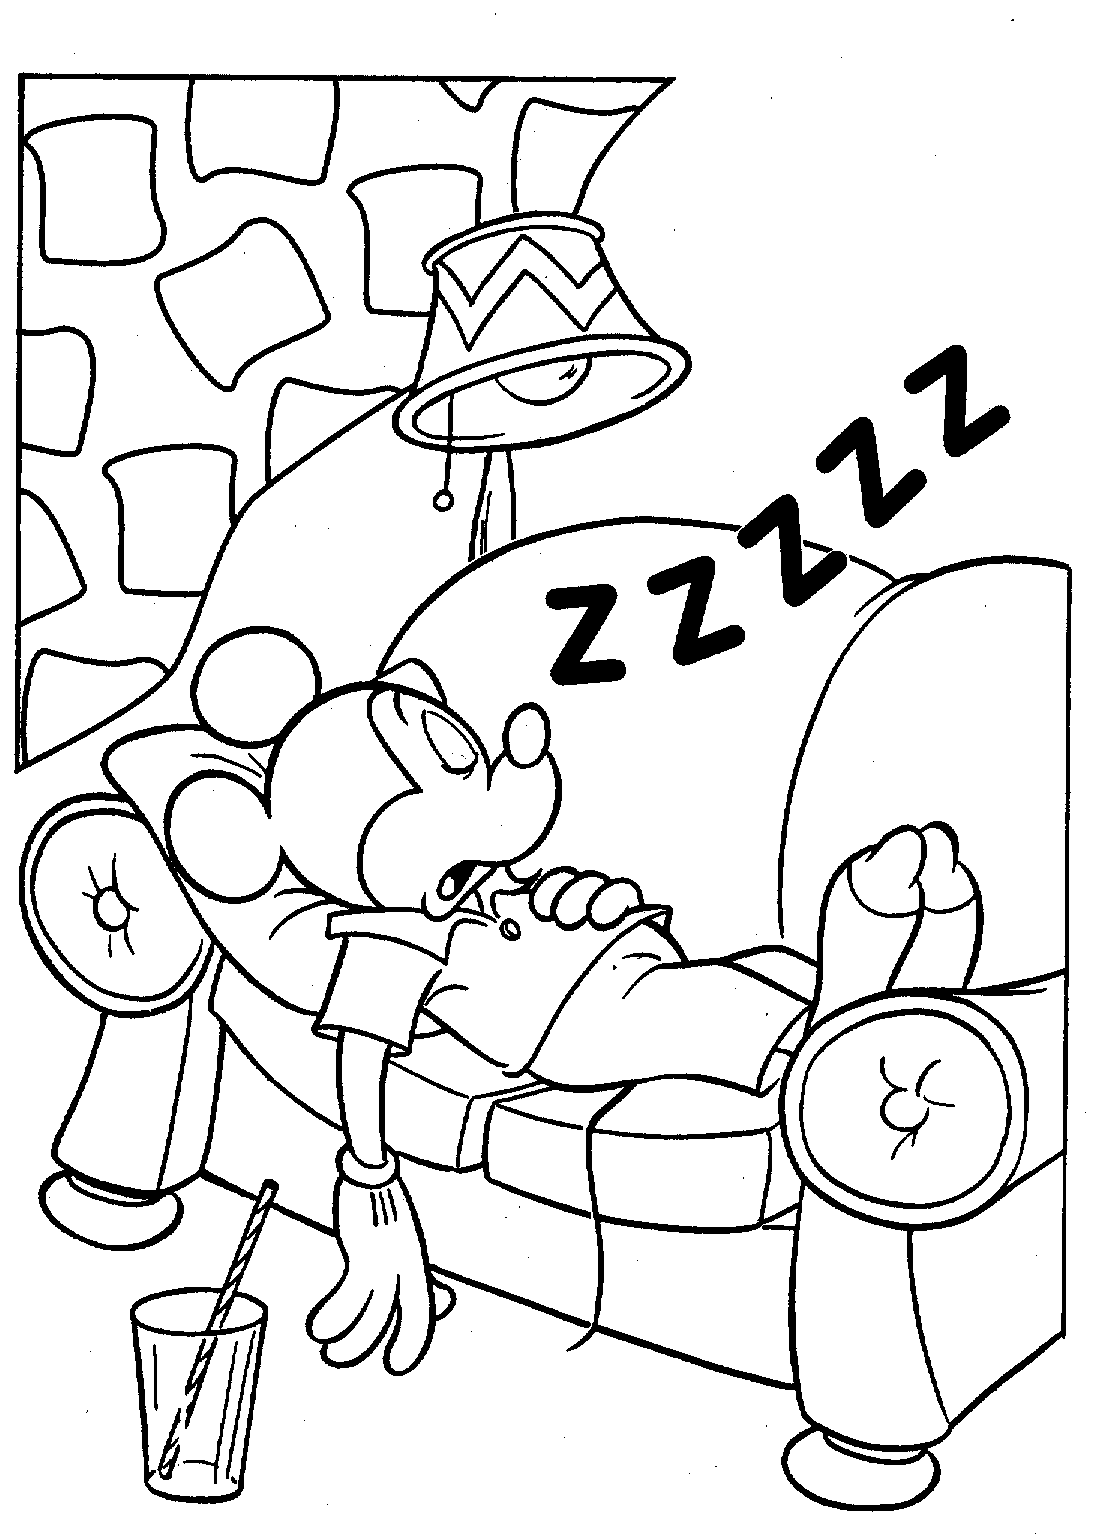 Mickey Falls Asleep On The Couch Disney Coloring Page